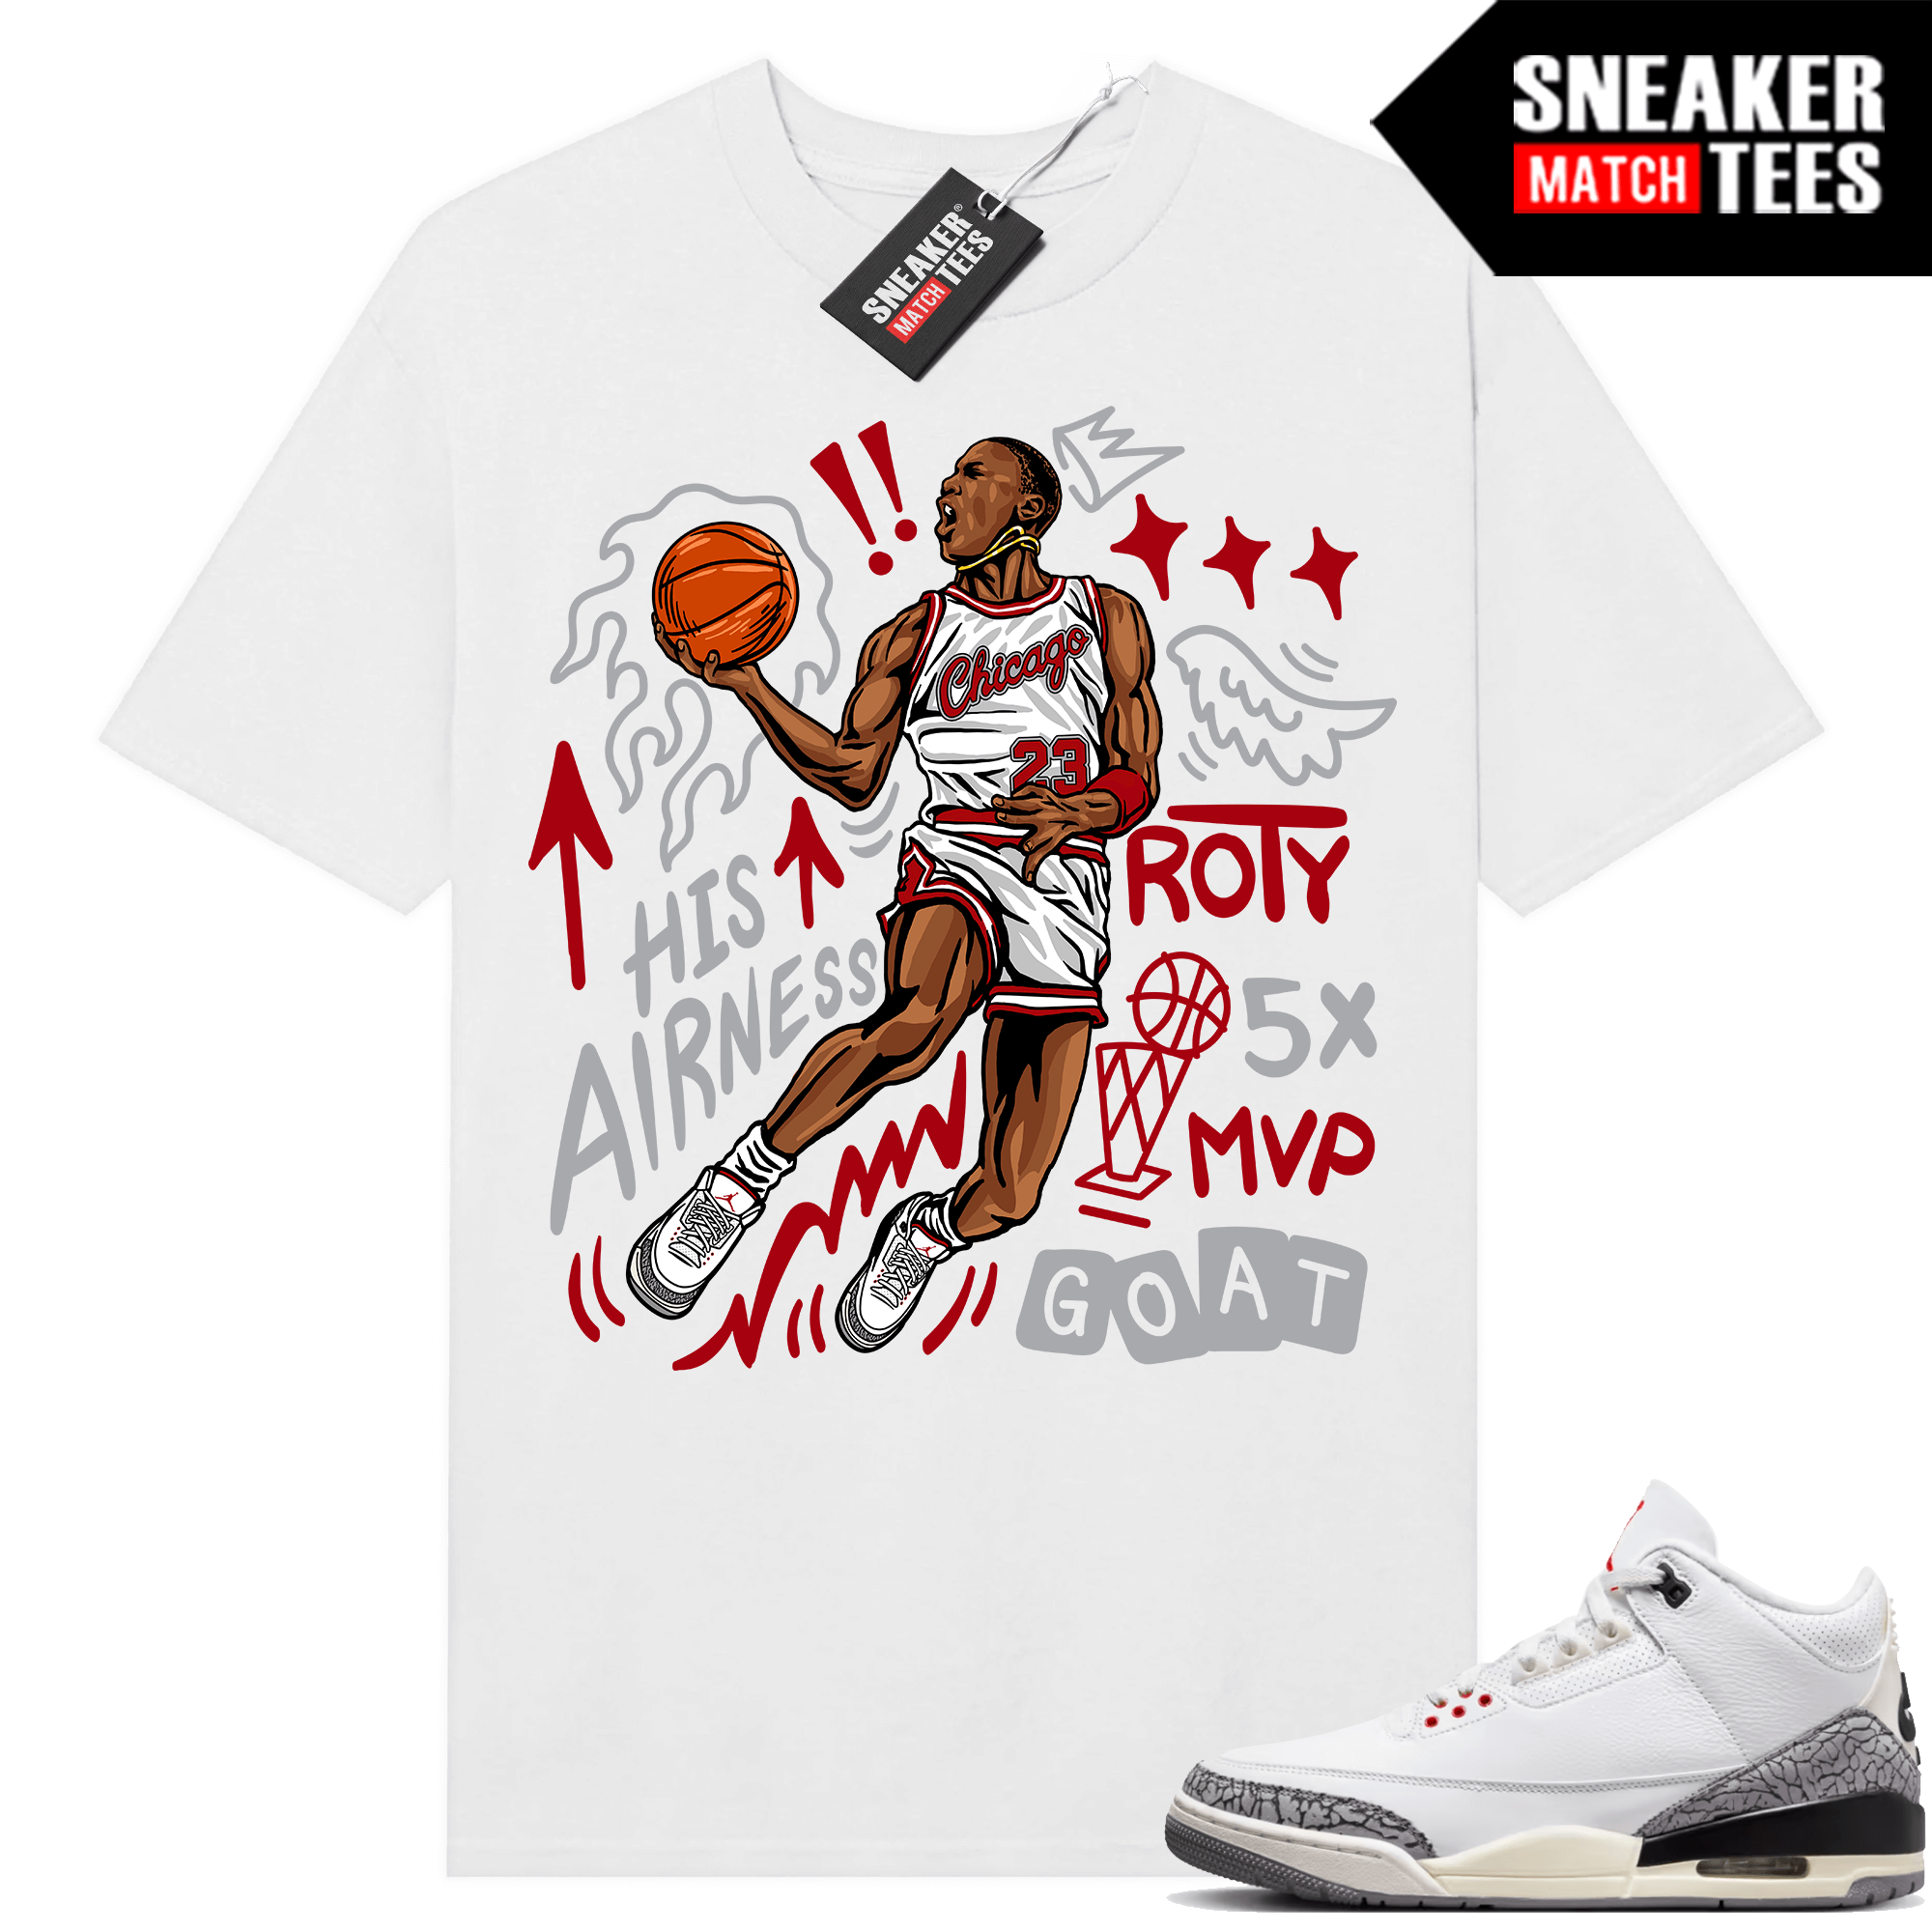 Jordan 3 White Cement Reimagined Sneaker Tees Match White MJ His Airness